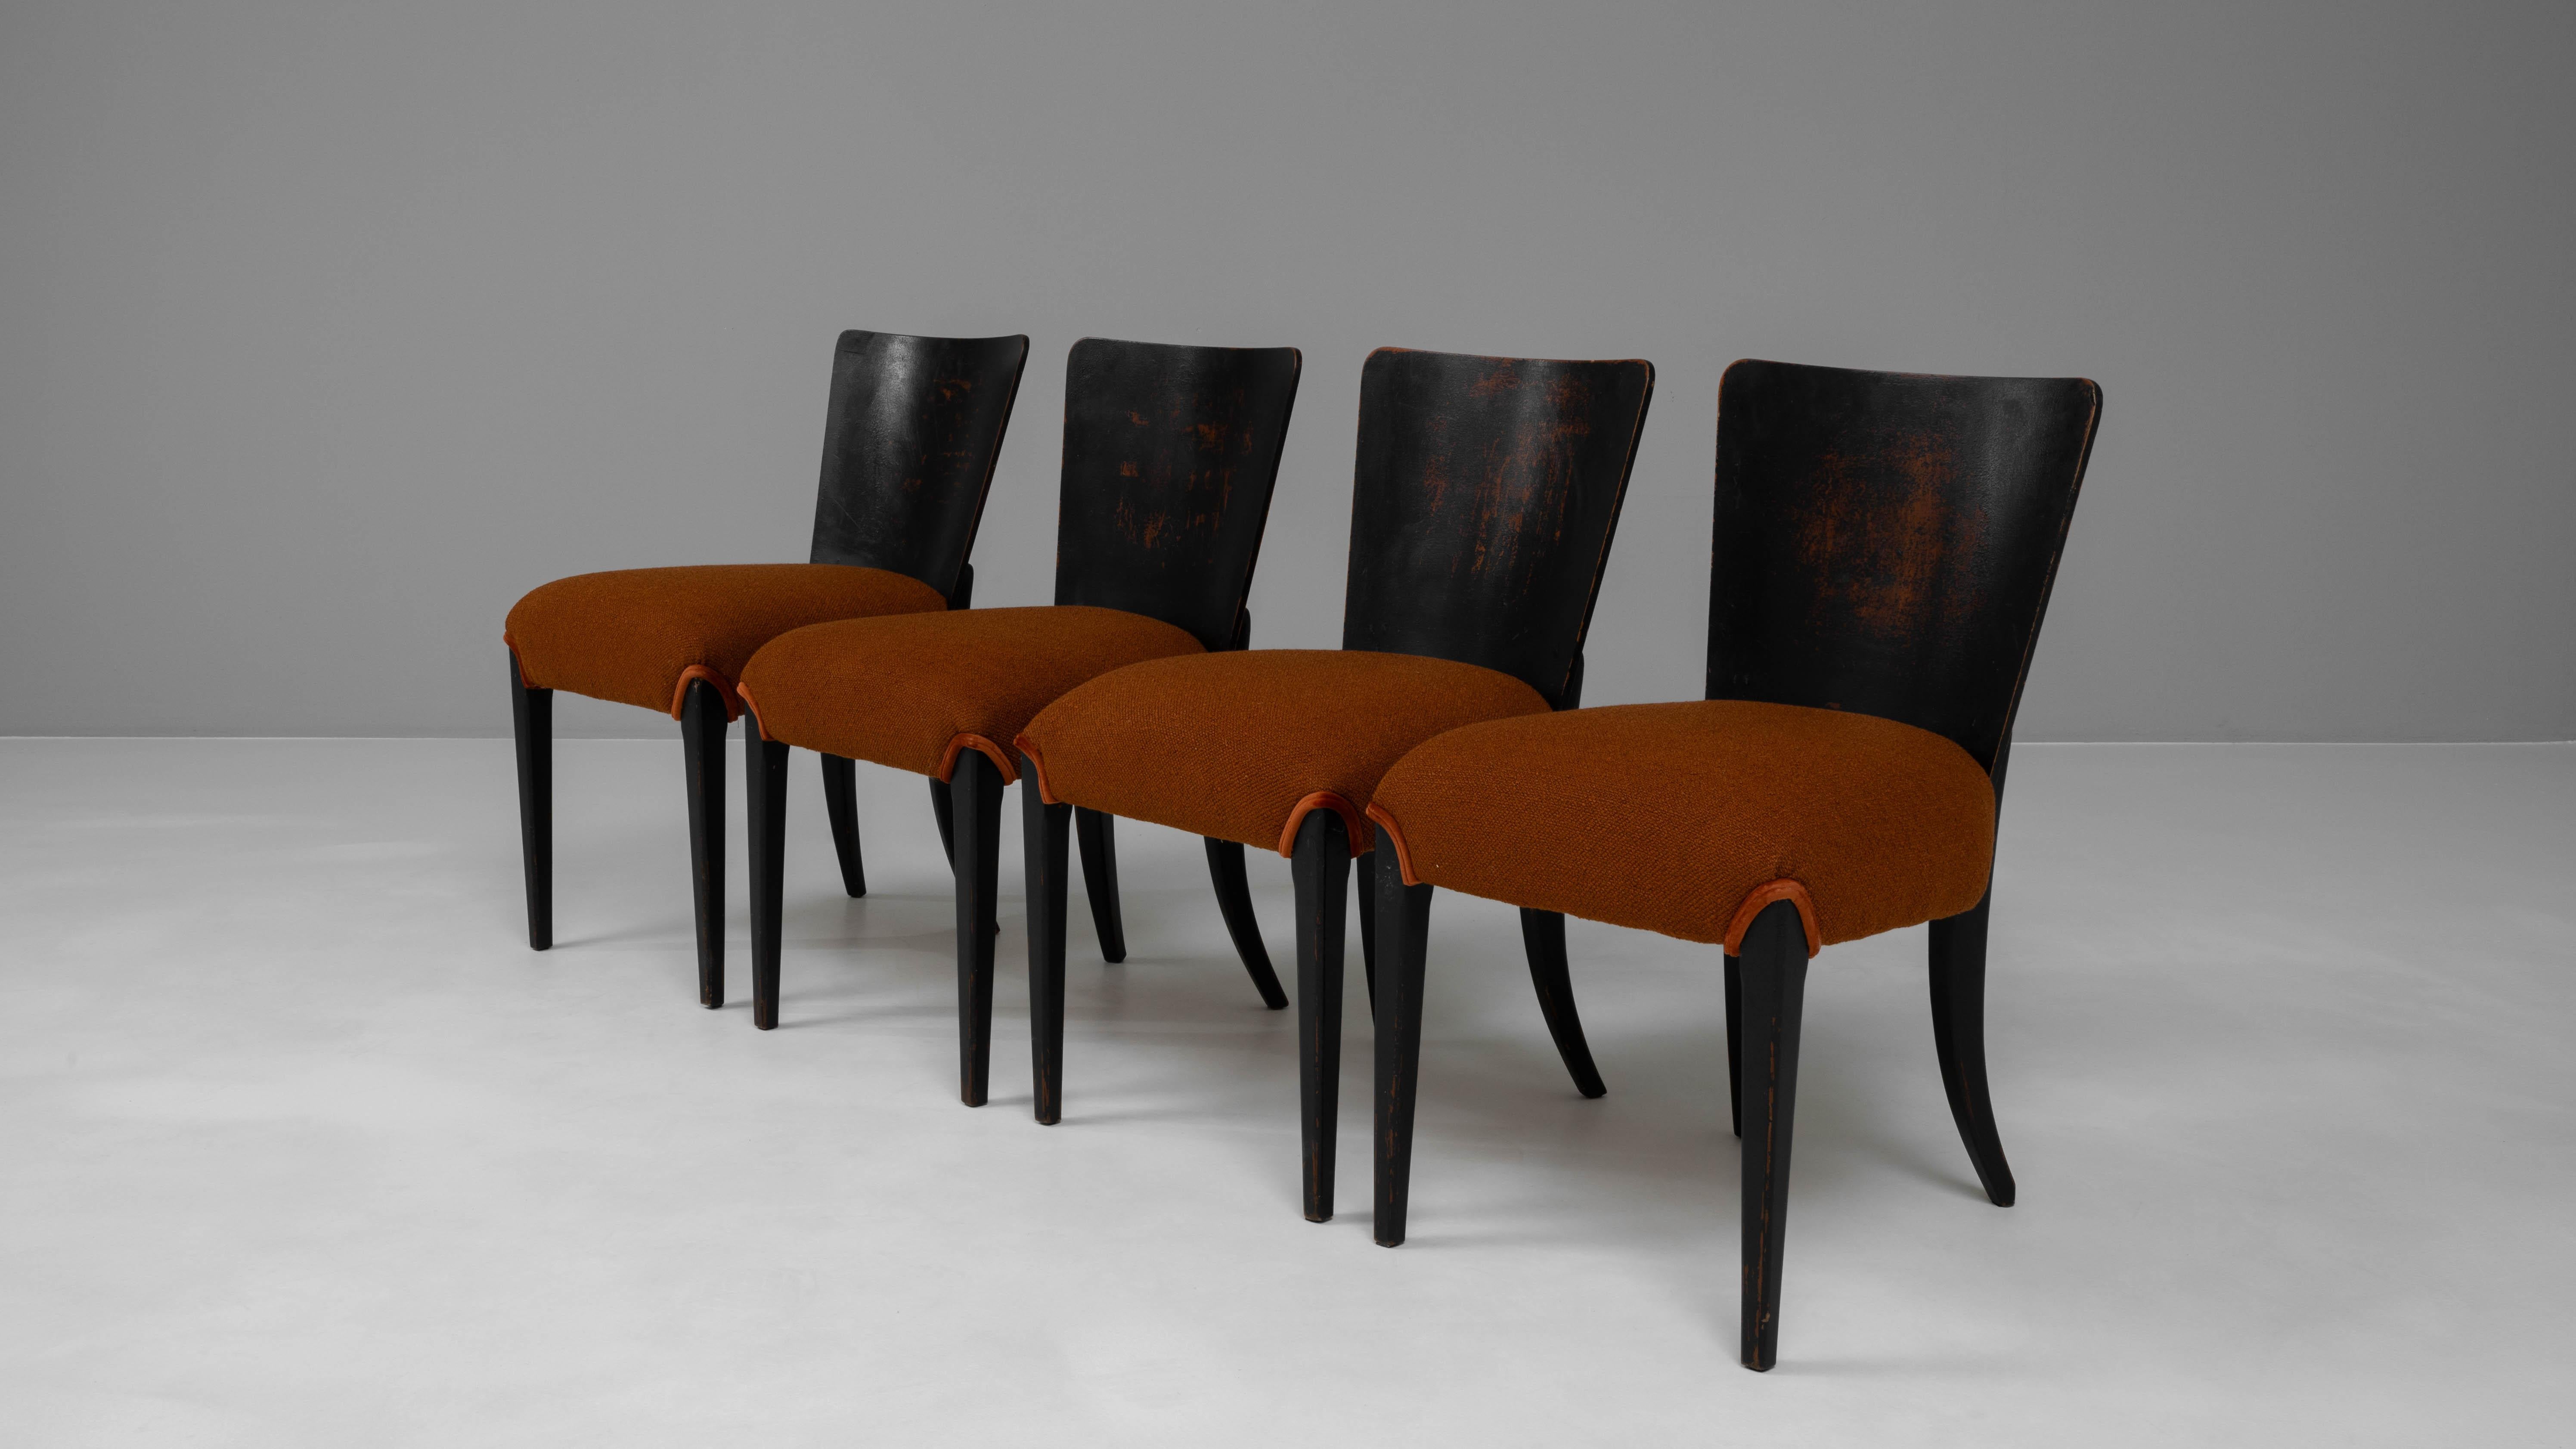 20th Century Czech Wooden Dining Chairs With Upholstered Seats By J. Halabala 8